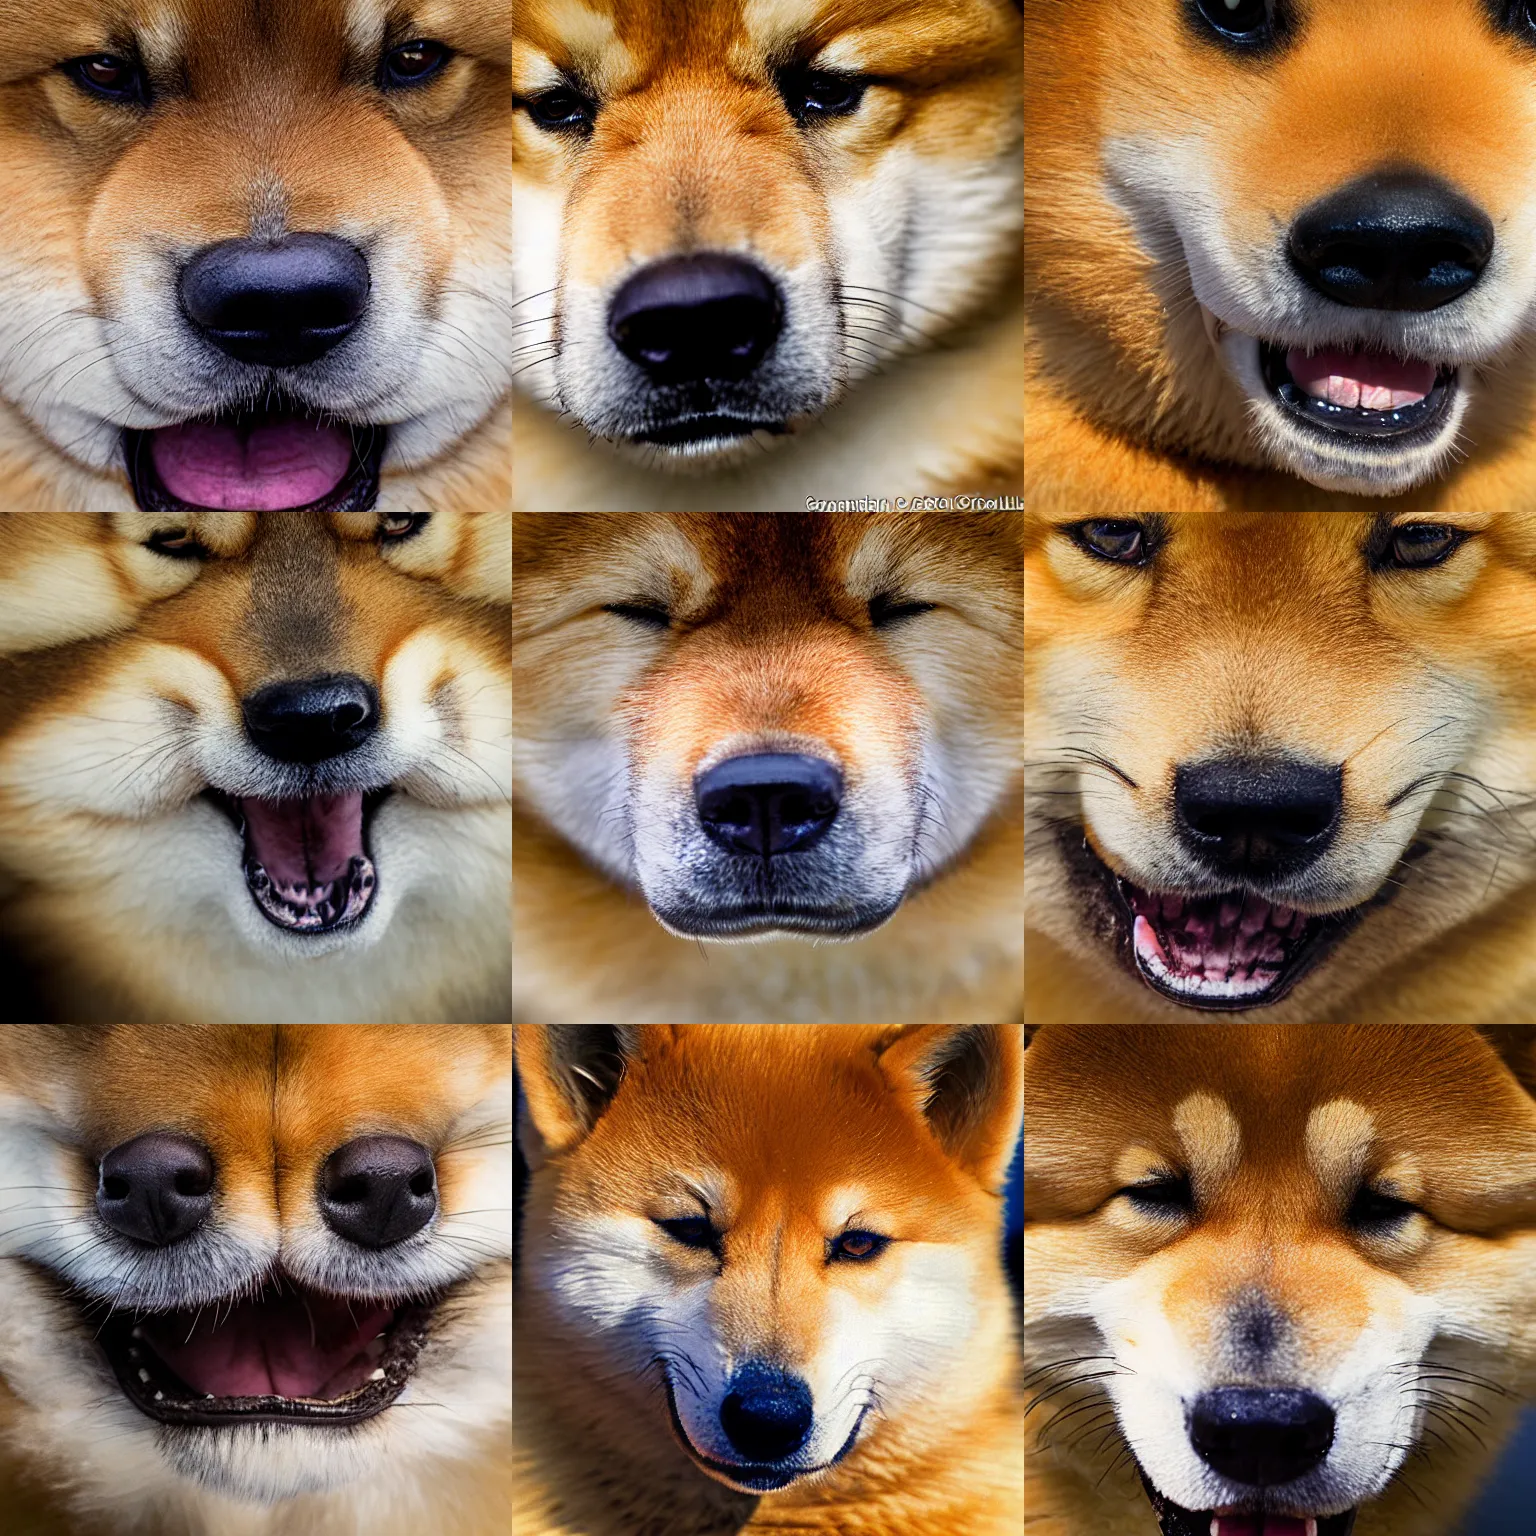 Prompt: award winning wildlife photography, Big fluffy shiba inu winking, close up of face, zoom in on face, wildlife photography by Paul Nicklen, shot by Joel Sartore, shot by DENNIS STOGSDILL, Skye Meaker, national geographic, perfect lighting